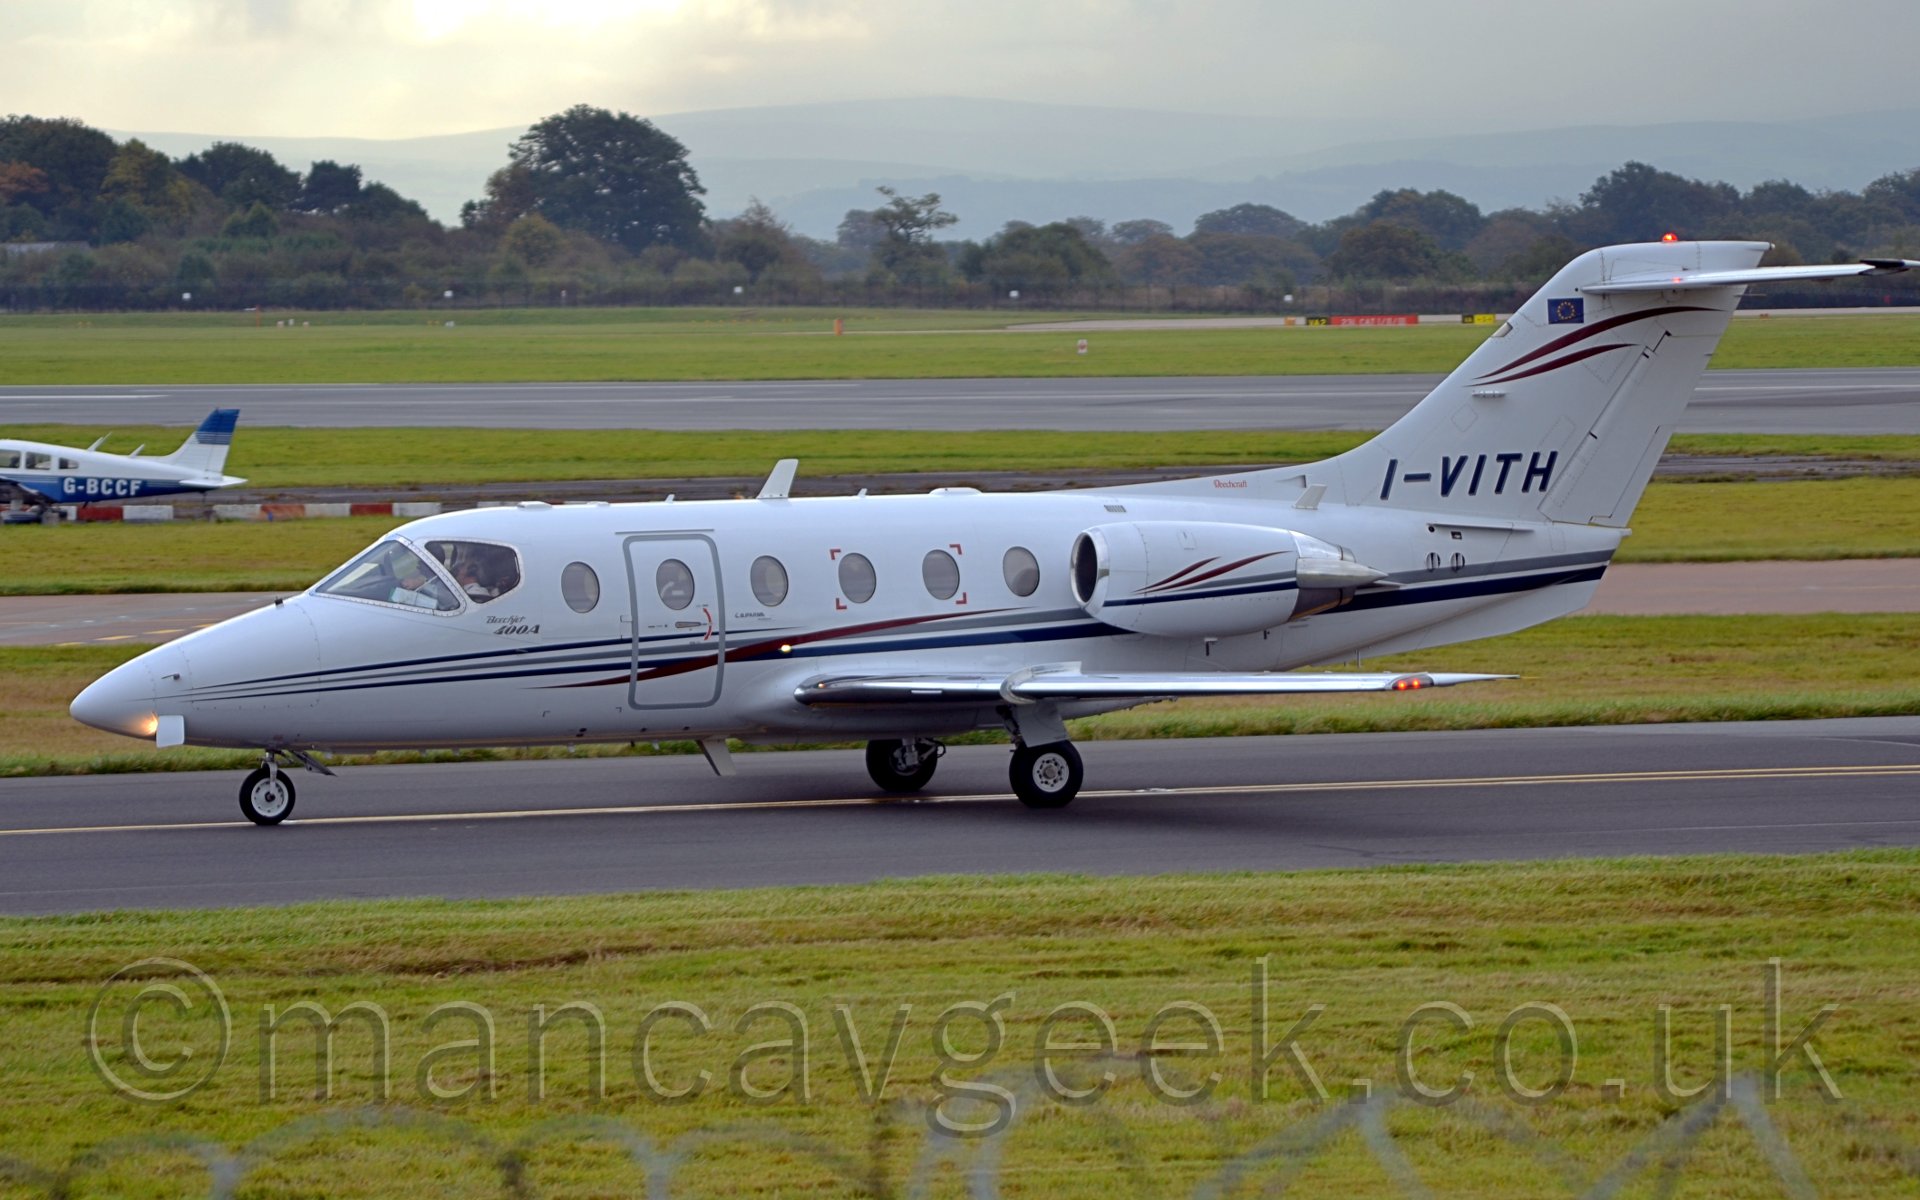 Side view of a twin engined bizjet taxiing from right to left. The plane is mostly white, with blue, grey, and red stripes running along the body and along the engines. The registration "I-VITH" is on the base of the tail in black, under more red stripes. Grass fills the lower part of the frame, with more grass, taxiways, and a runway leading off to trees in the distance. There is a single-engined blue and white light aircraft poking it's tail in to the middle left of the frame. Rolling hills in the far distance slowly fade into the hazy white sky.